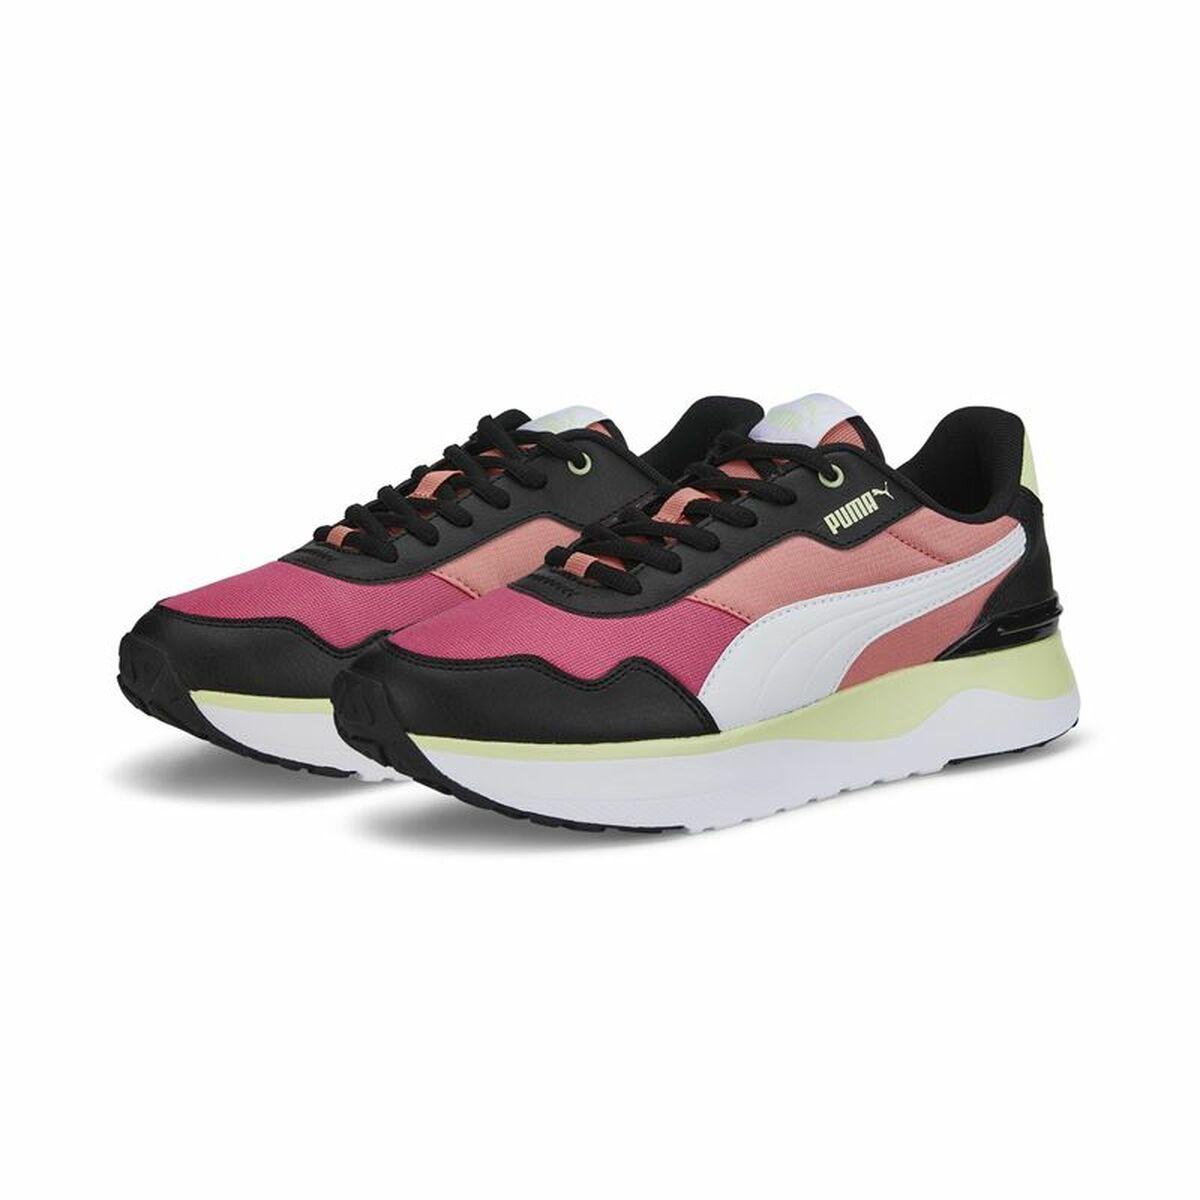 PUMA Sports Trainers For Women R78 Voyage | Lyst